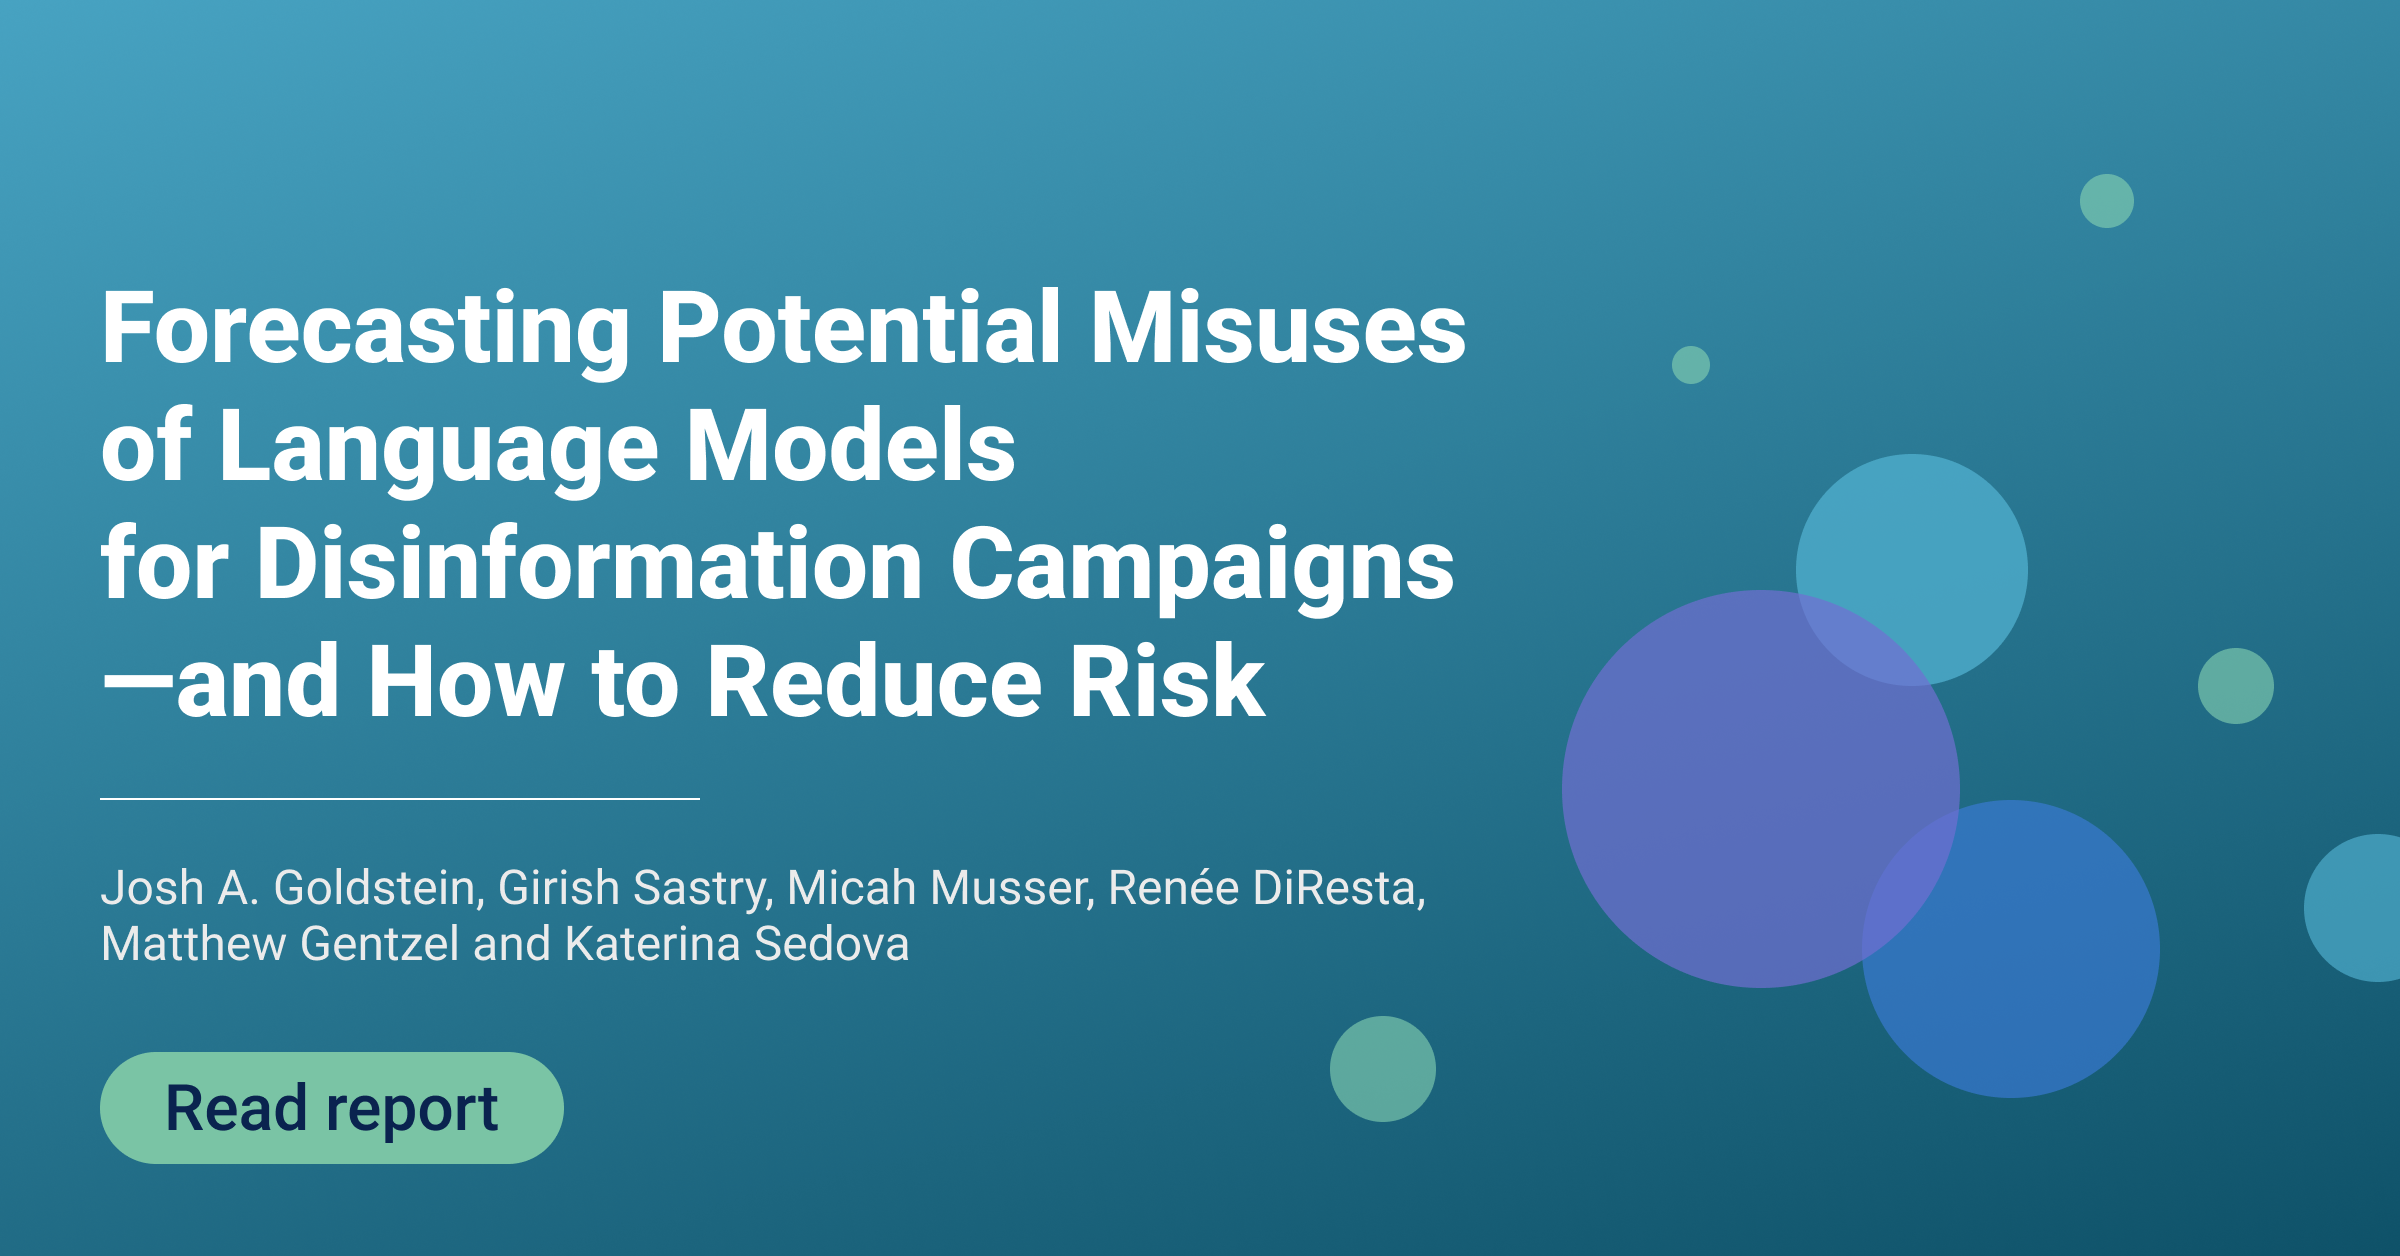 Forecasting potential misuses of language models for disinformation campaigns and how to reduce risk